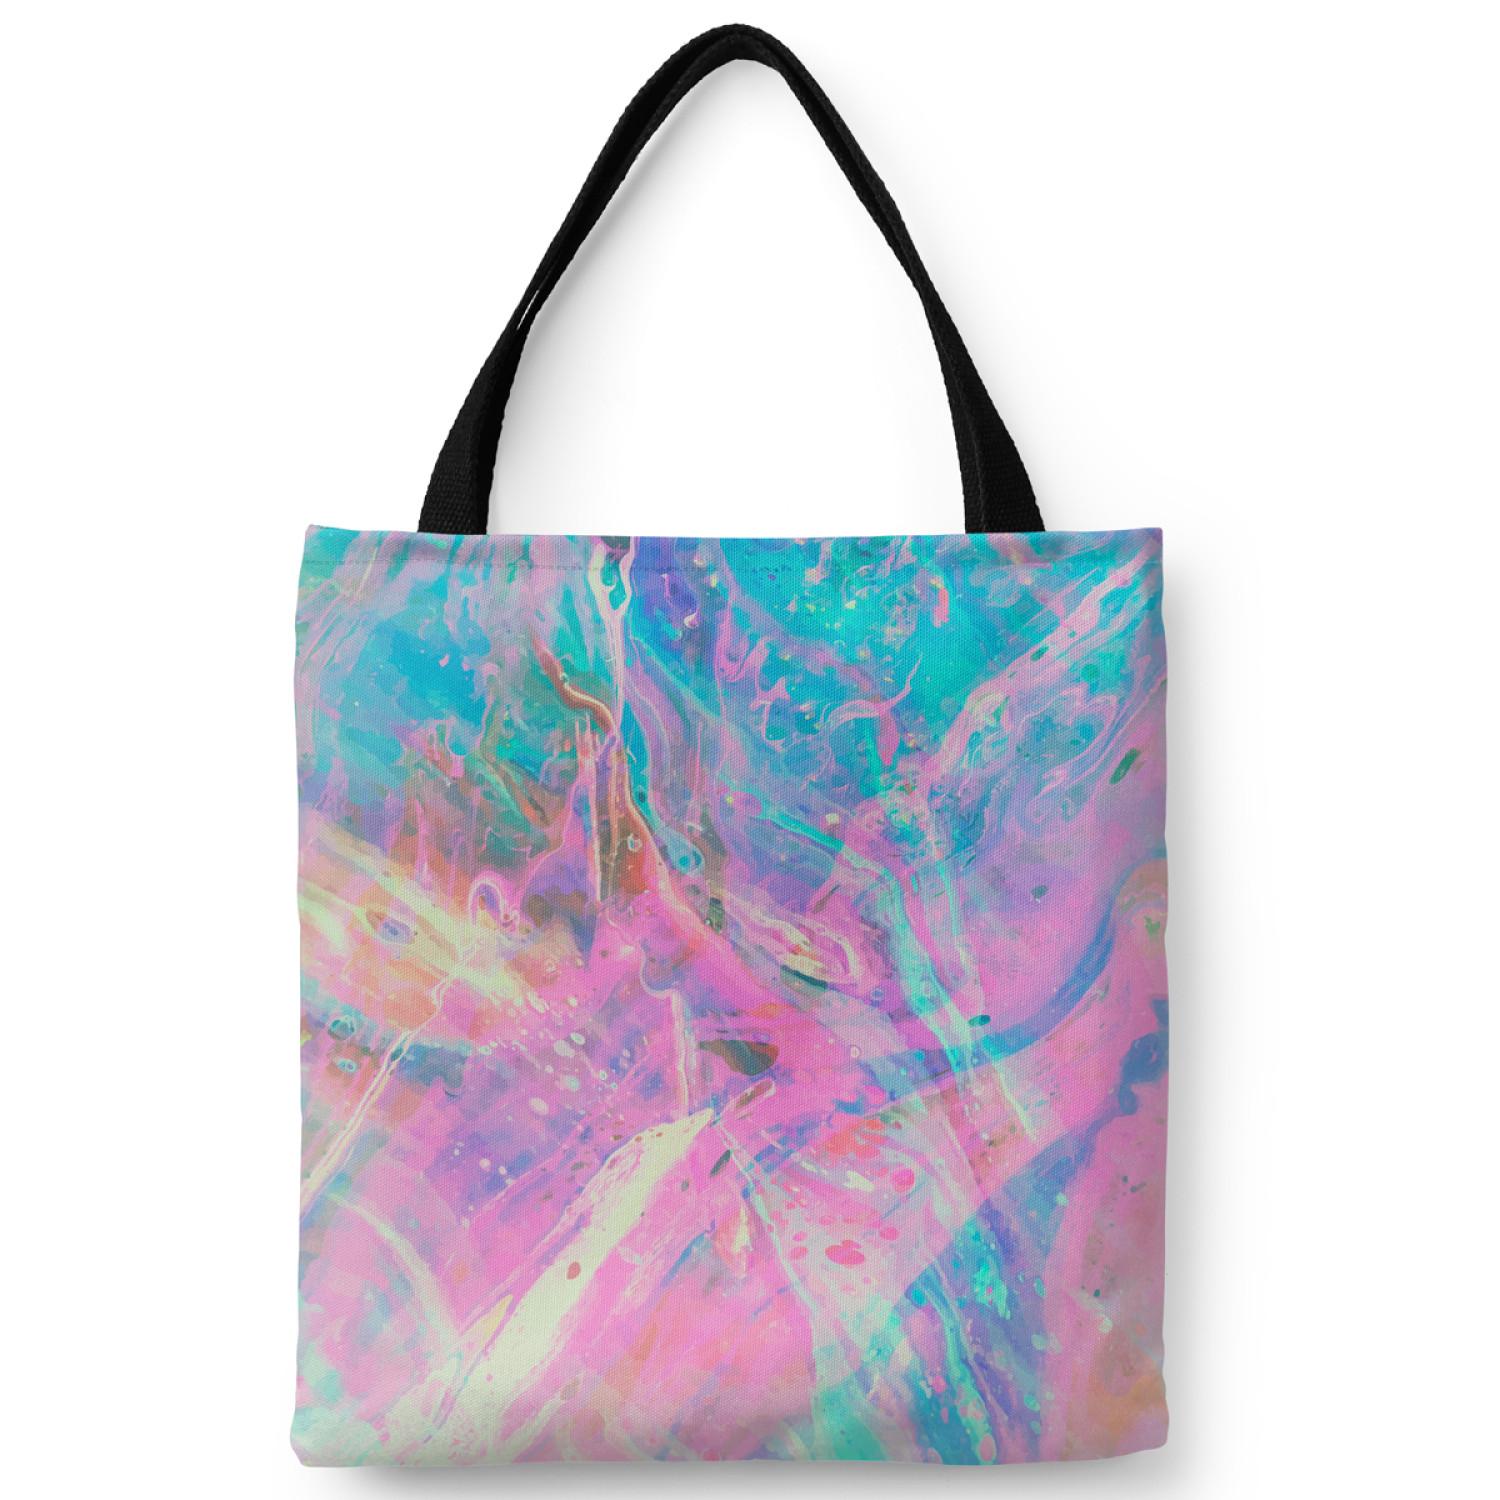 Shopping Bag Liquid cosmos - an abstract graphics in holographic style